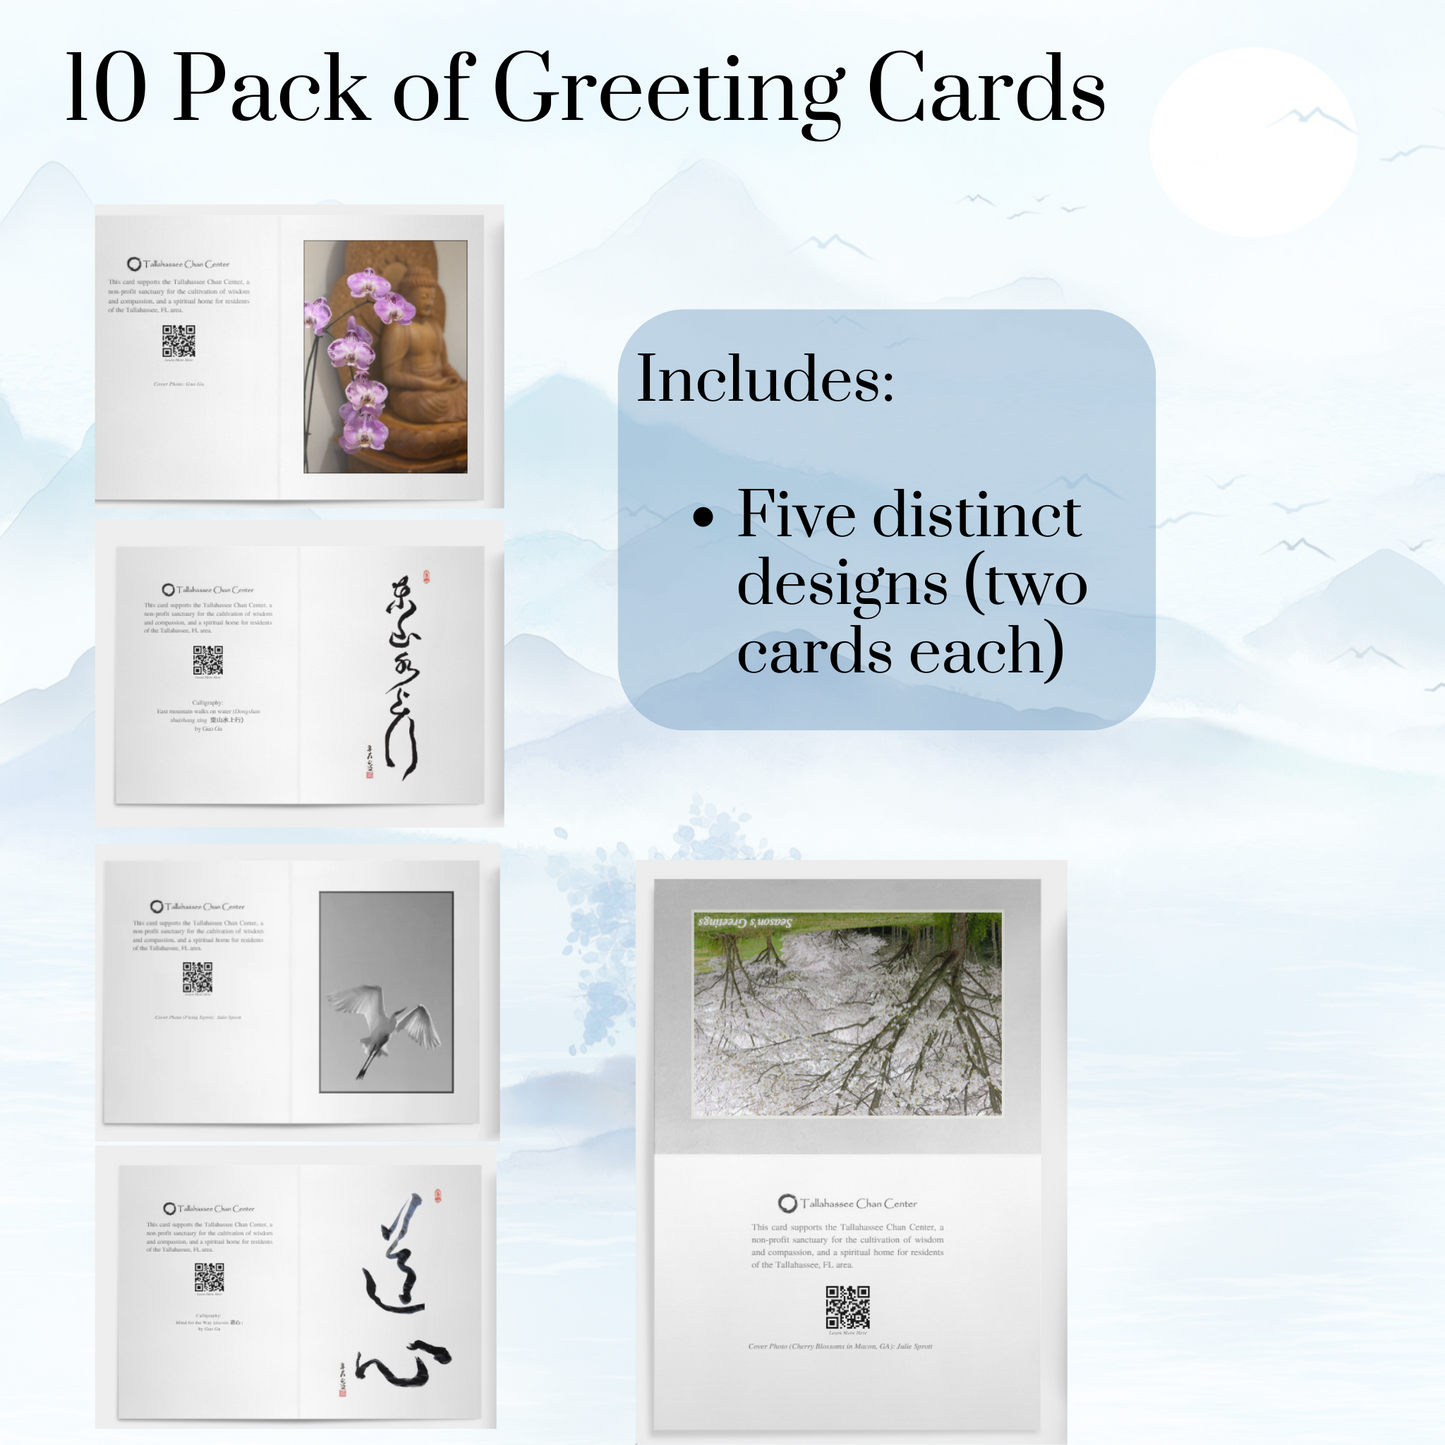 10 Pack of Greeting Cards